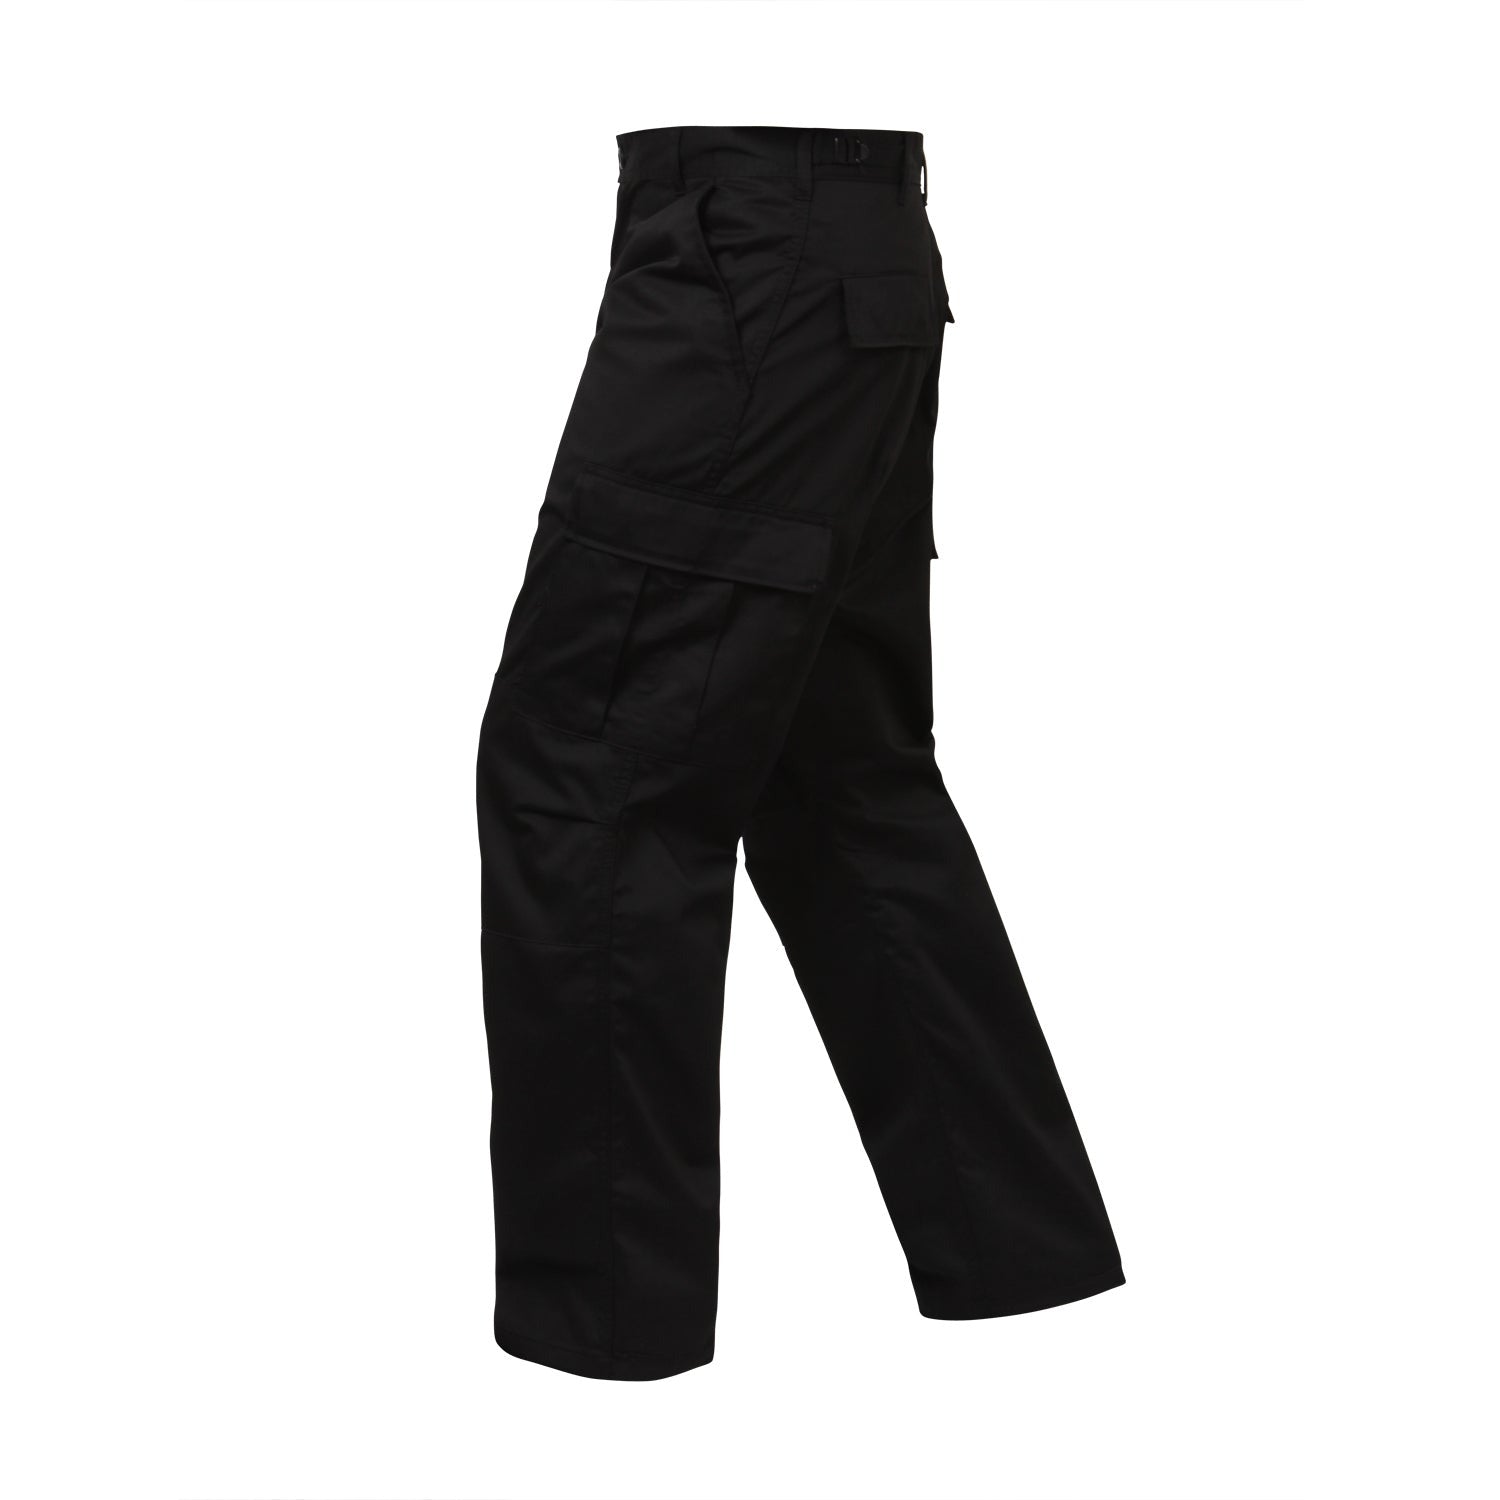 Rothco’s Relaxed Fit Zipper Fly BDU Pants feature the same comfortable and durable material composition as our military-style BDU pants, but with a wider leg opening and zipper fly that support a relaxed fit. 